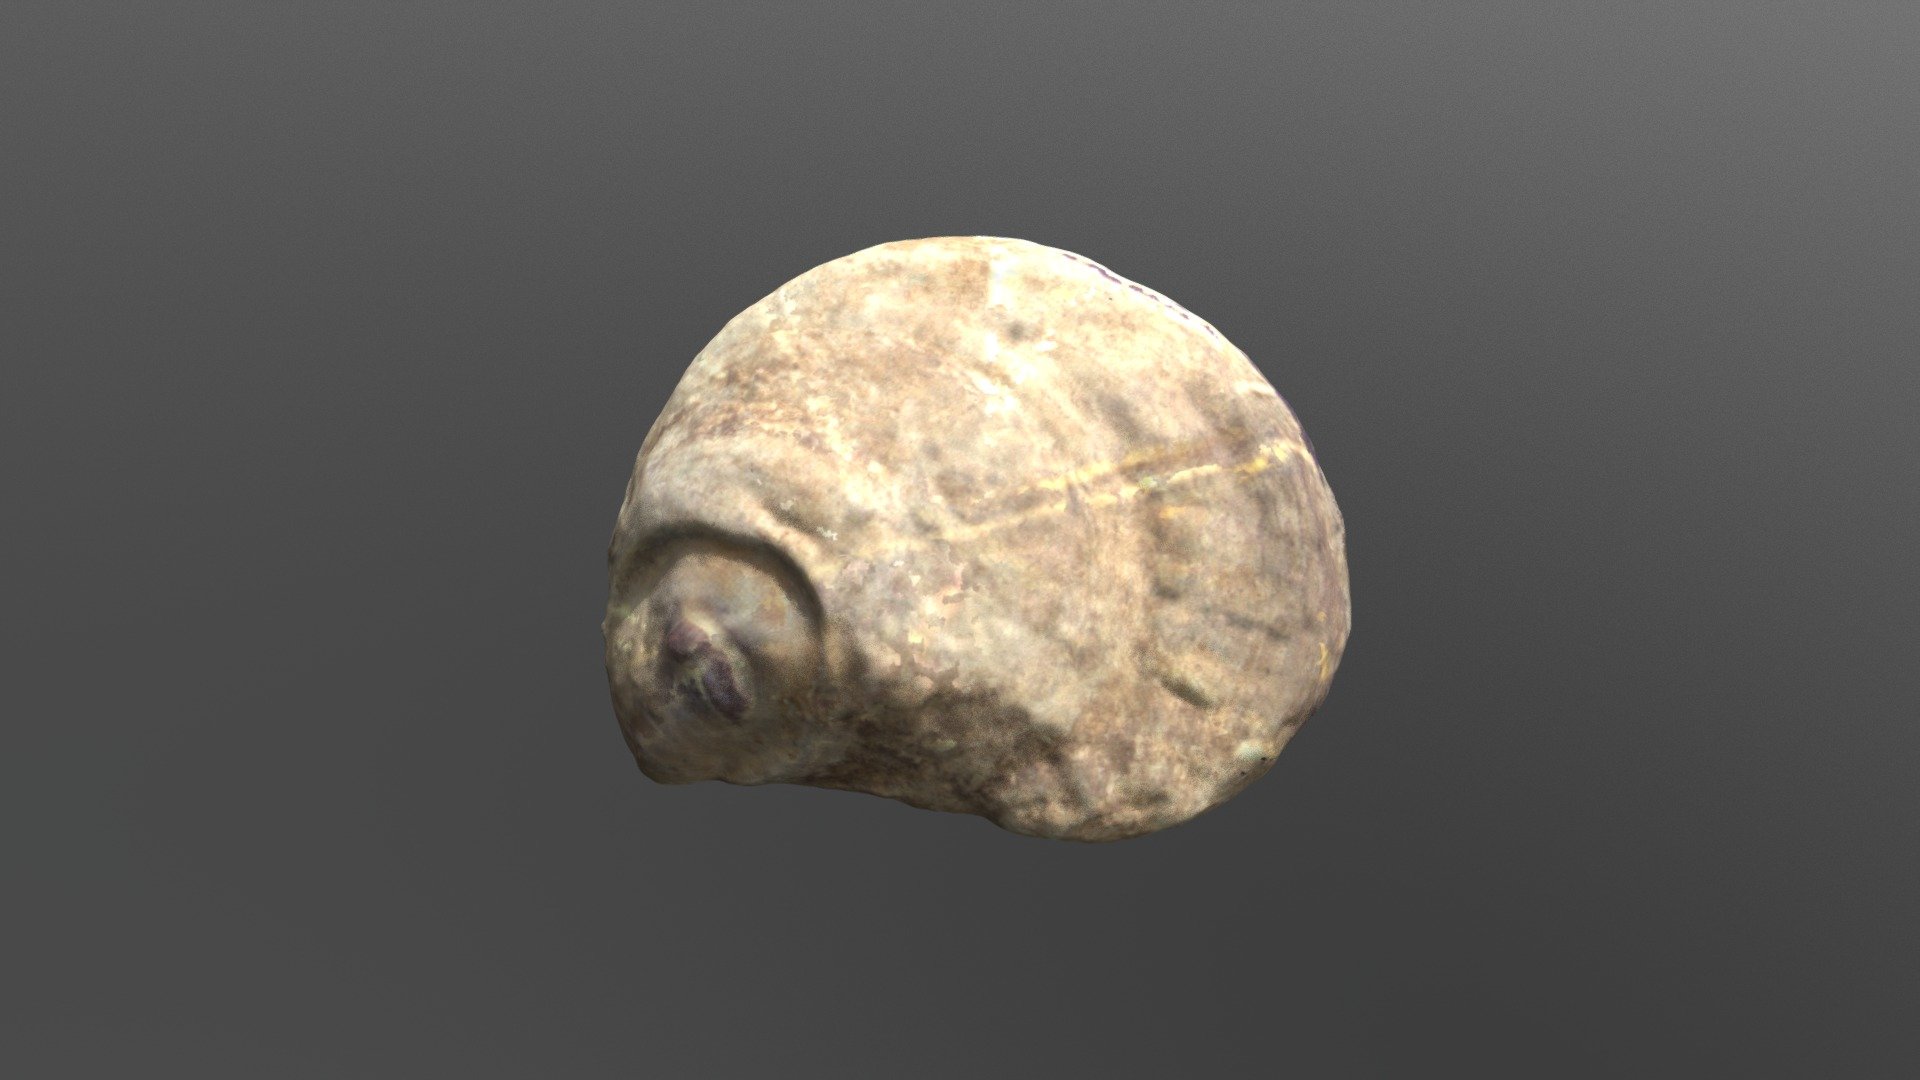 Oyster Shell with Mortar (VCU_3D_3171)